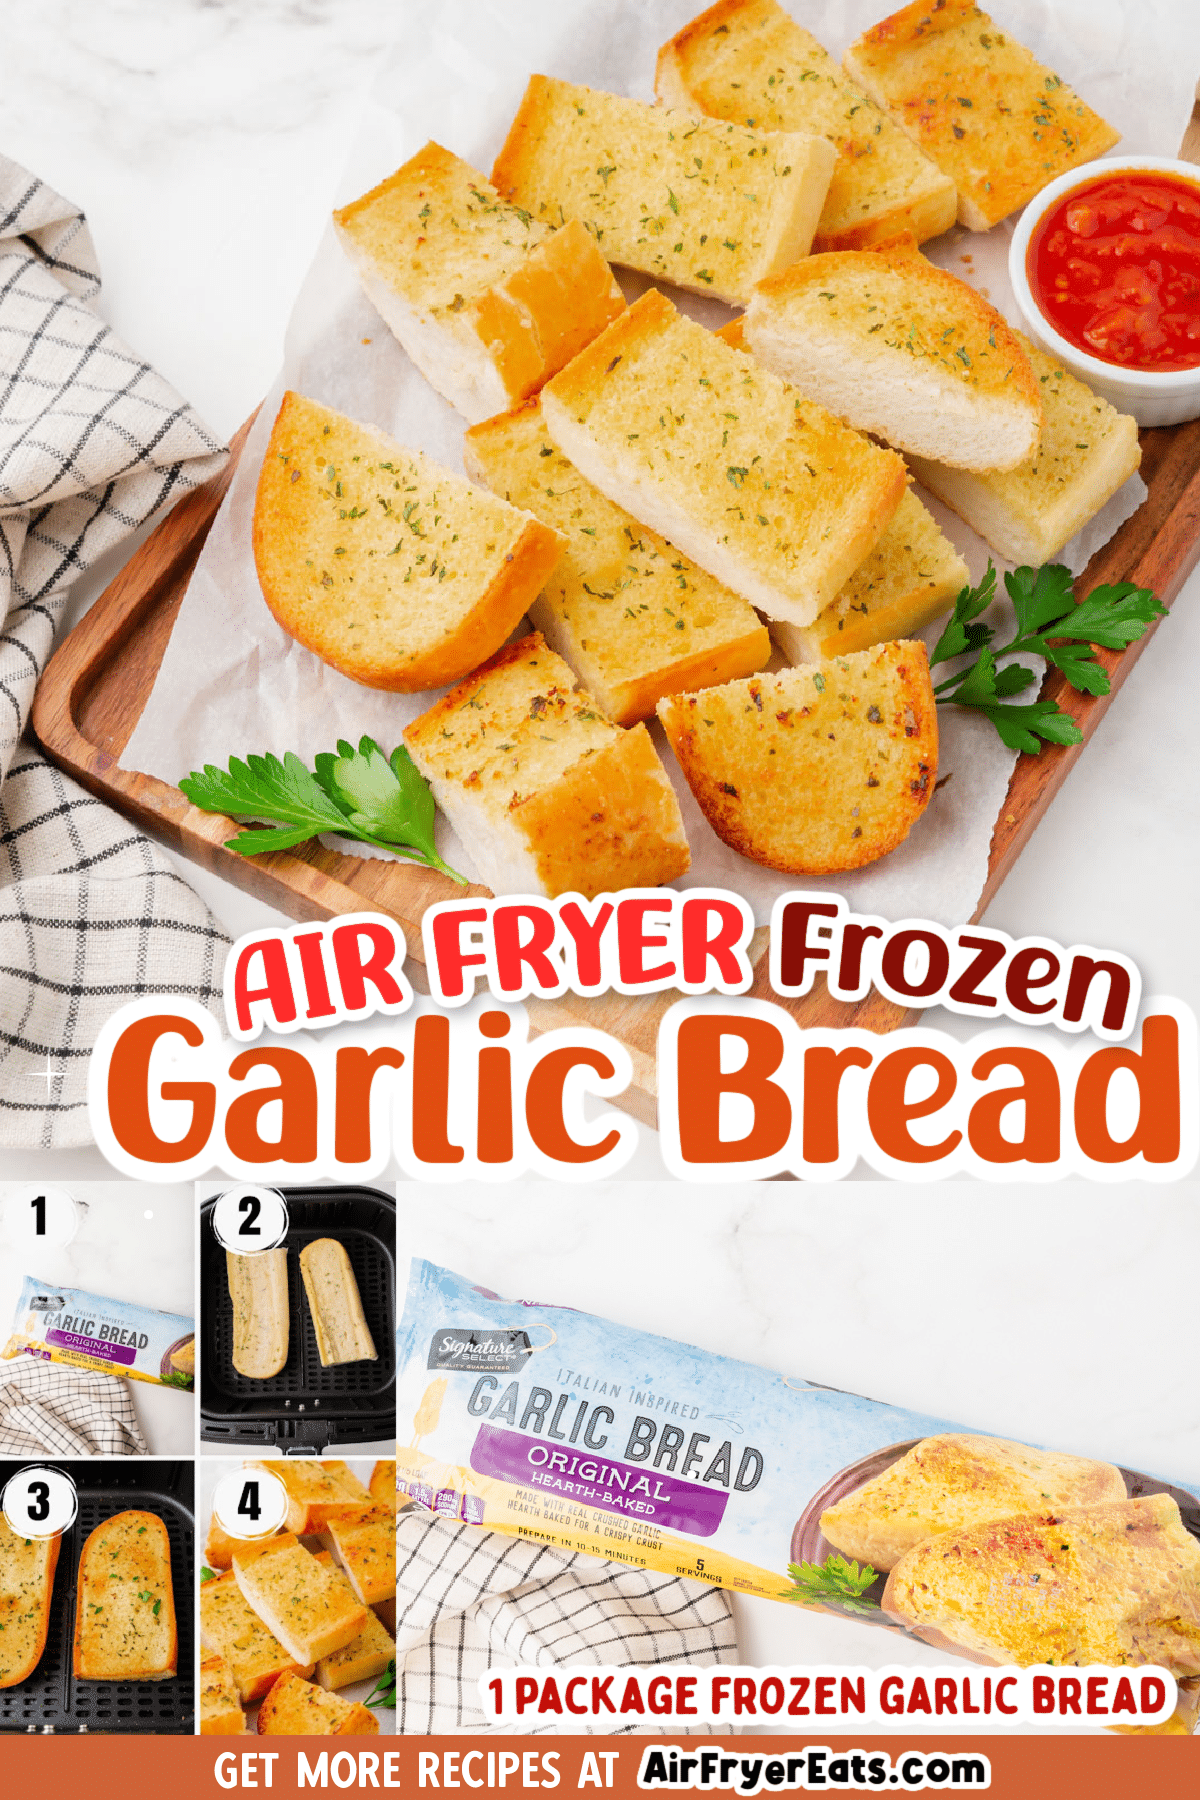 vertical photo of sliced air fried garlic bread with a pot of red sauce and some green leaves for garnish. Text overlay says air fryer frozen garlic bread. Bottom left of the image is a 4 step collage of the process, and bottom right is an image of a frozen garlic bread stick. Website address at the very bottom of the image via @vegetarianmamma